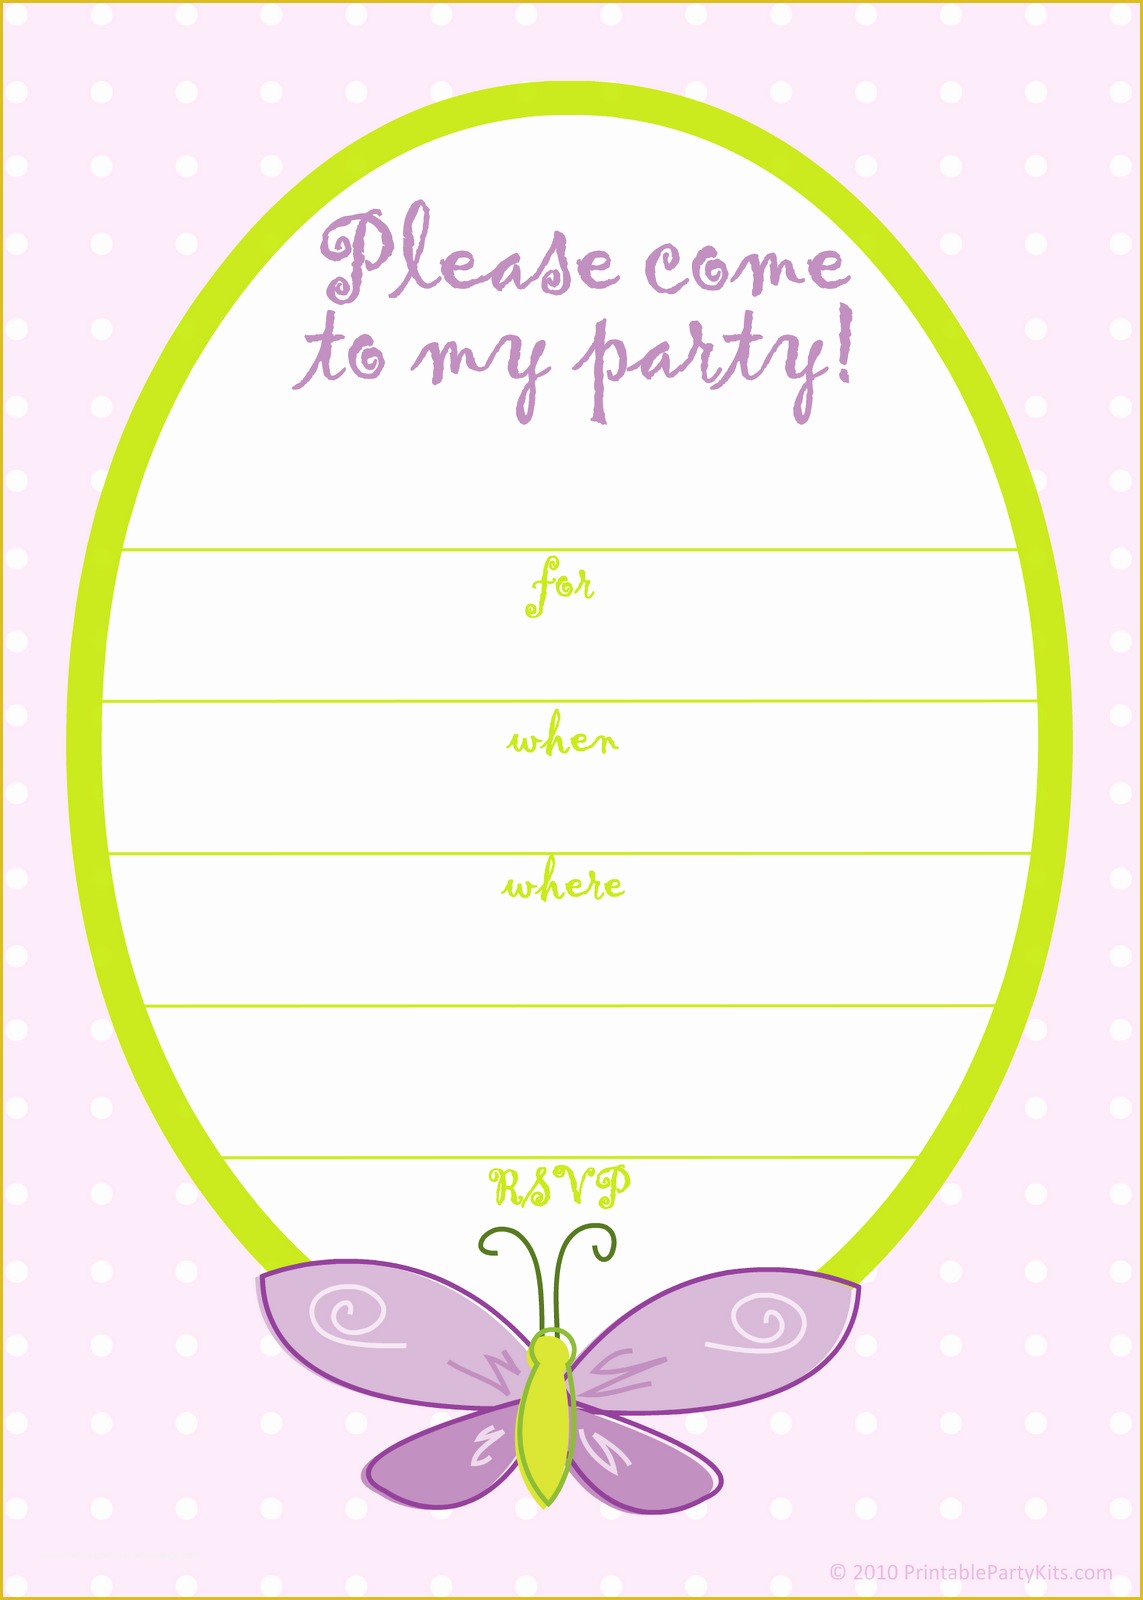 Girl Birthday Invitations Templates Free Of Free Printable Party Invitations Free Pink butterfly